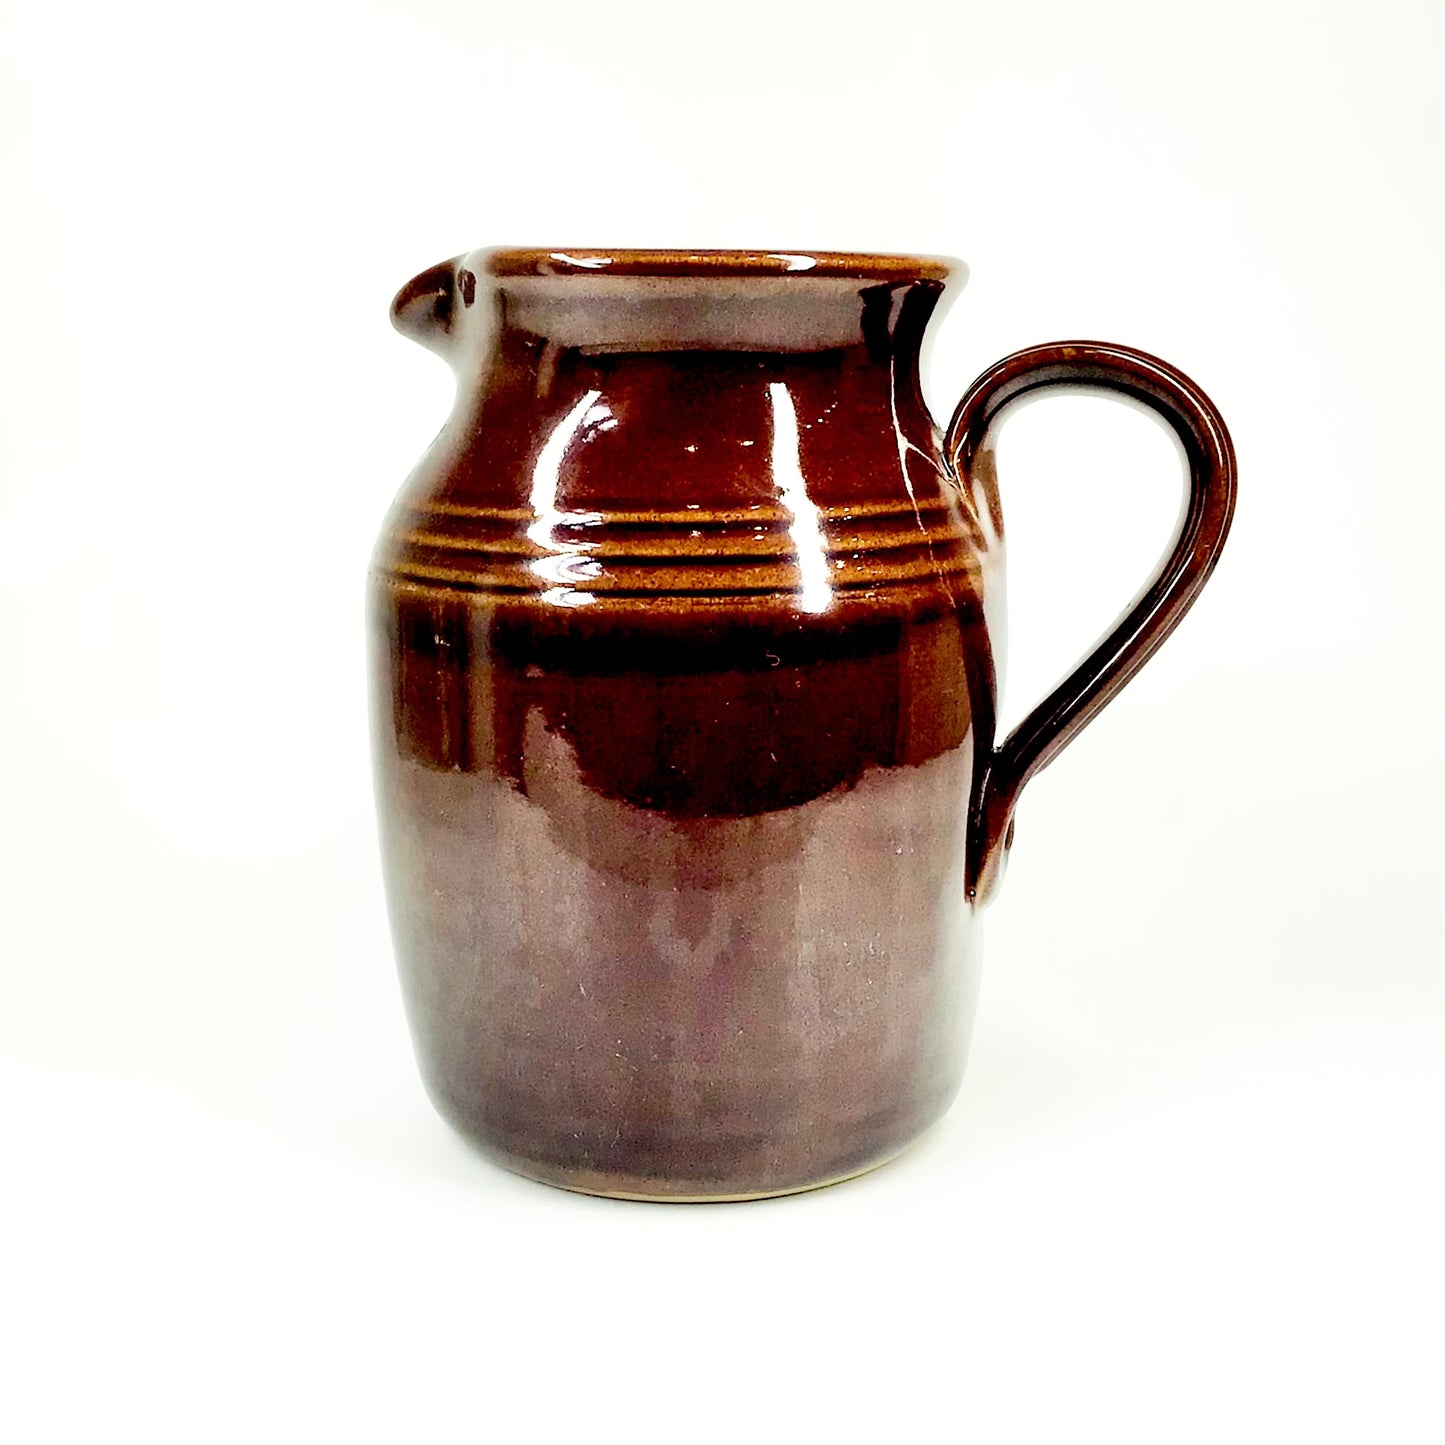 Midcentury Pearsons Chesterfield England stoneware pottery jug/vase